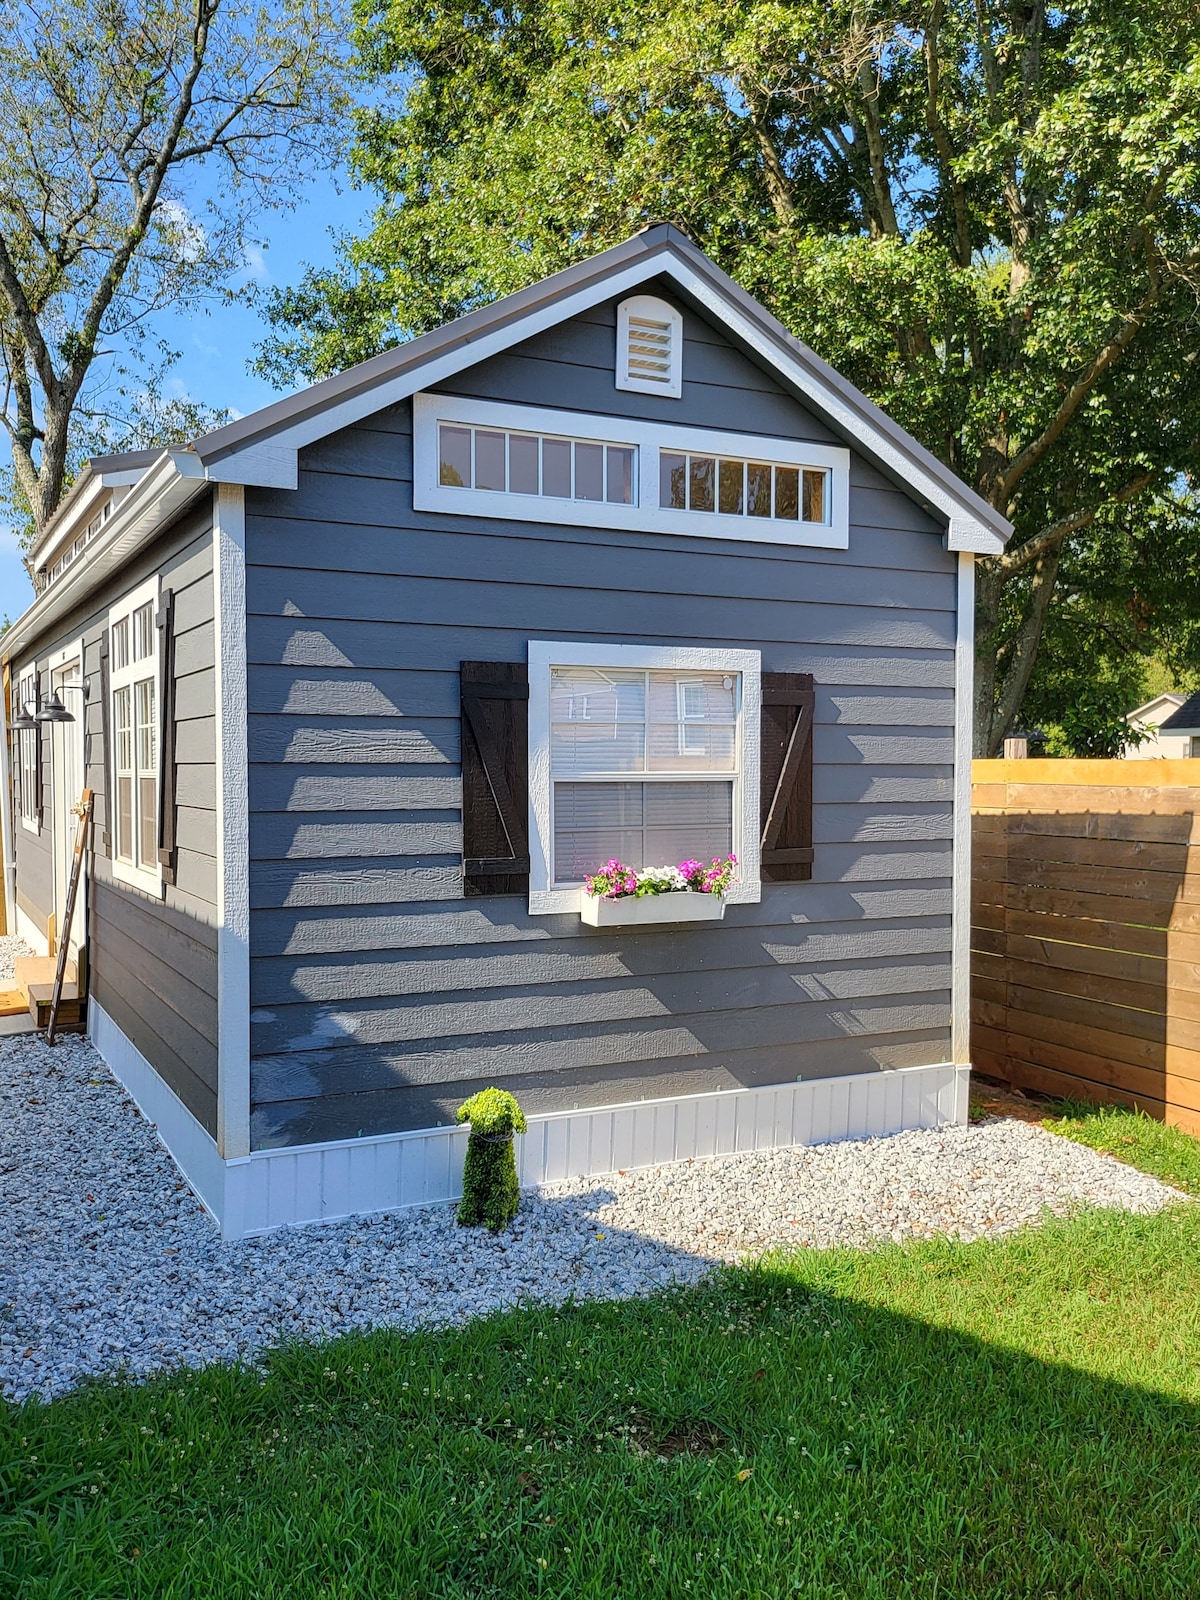 Upscale Tiny Home close to downtown Greenville